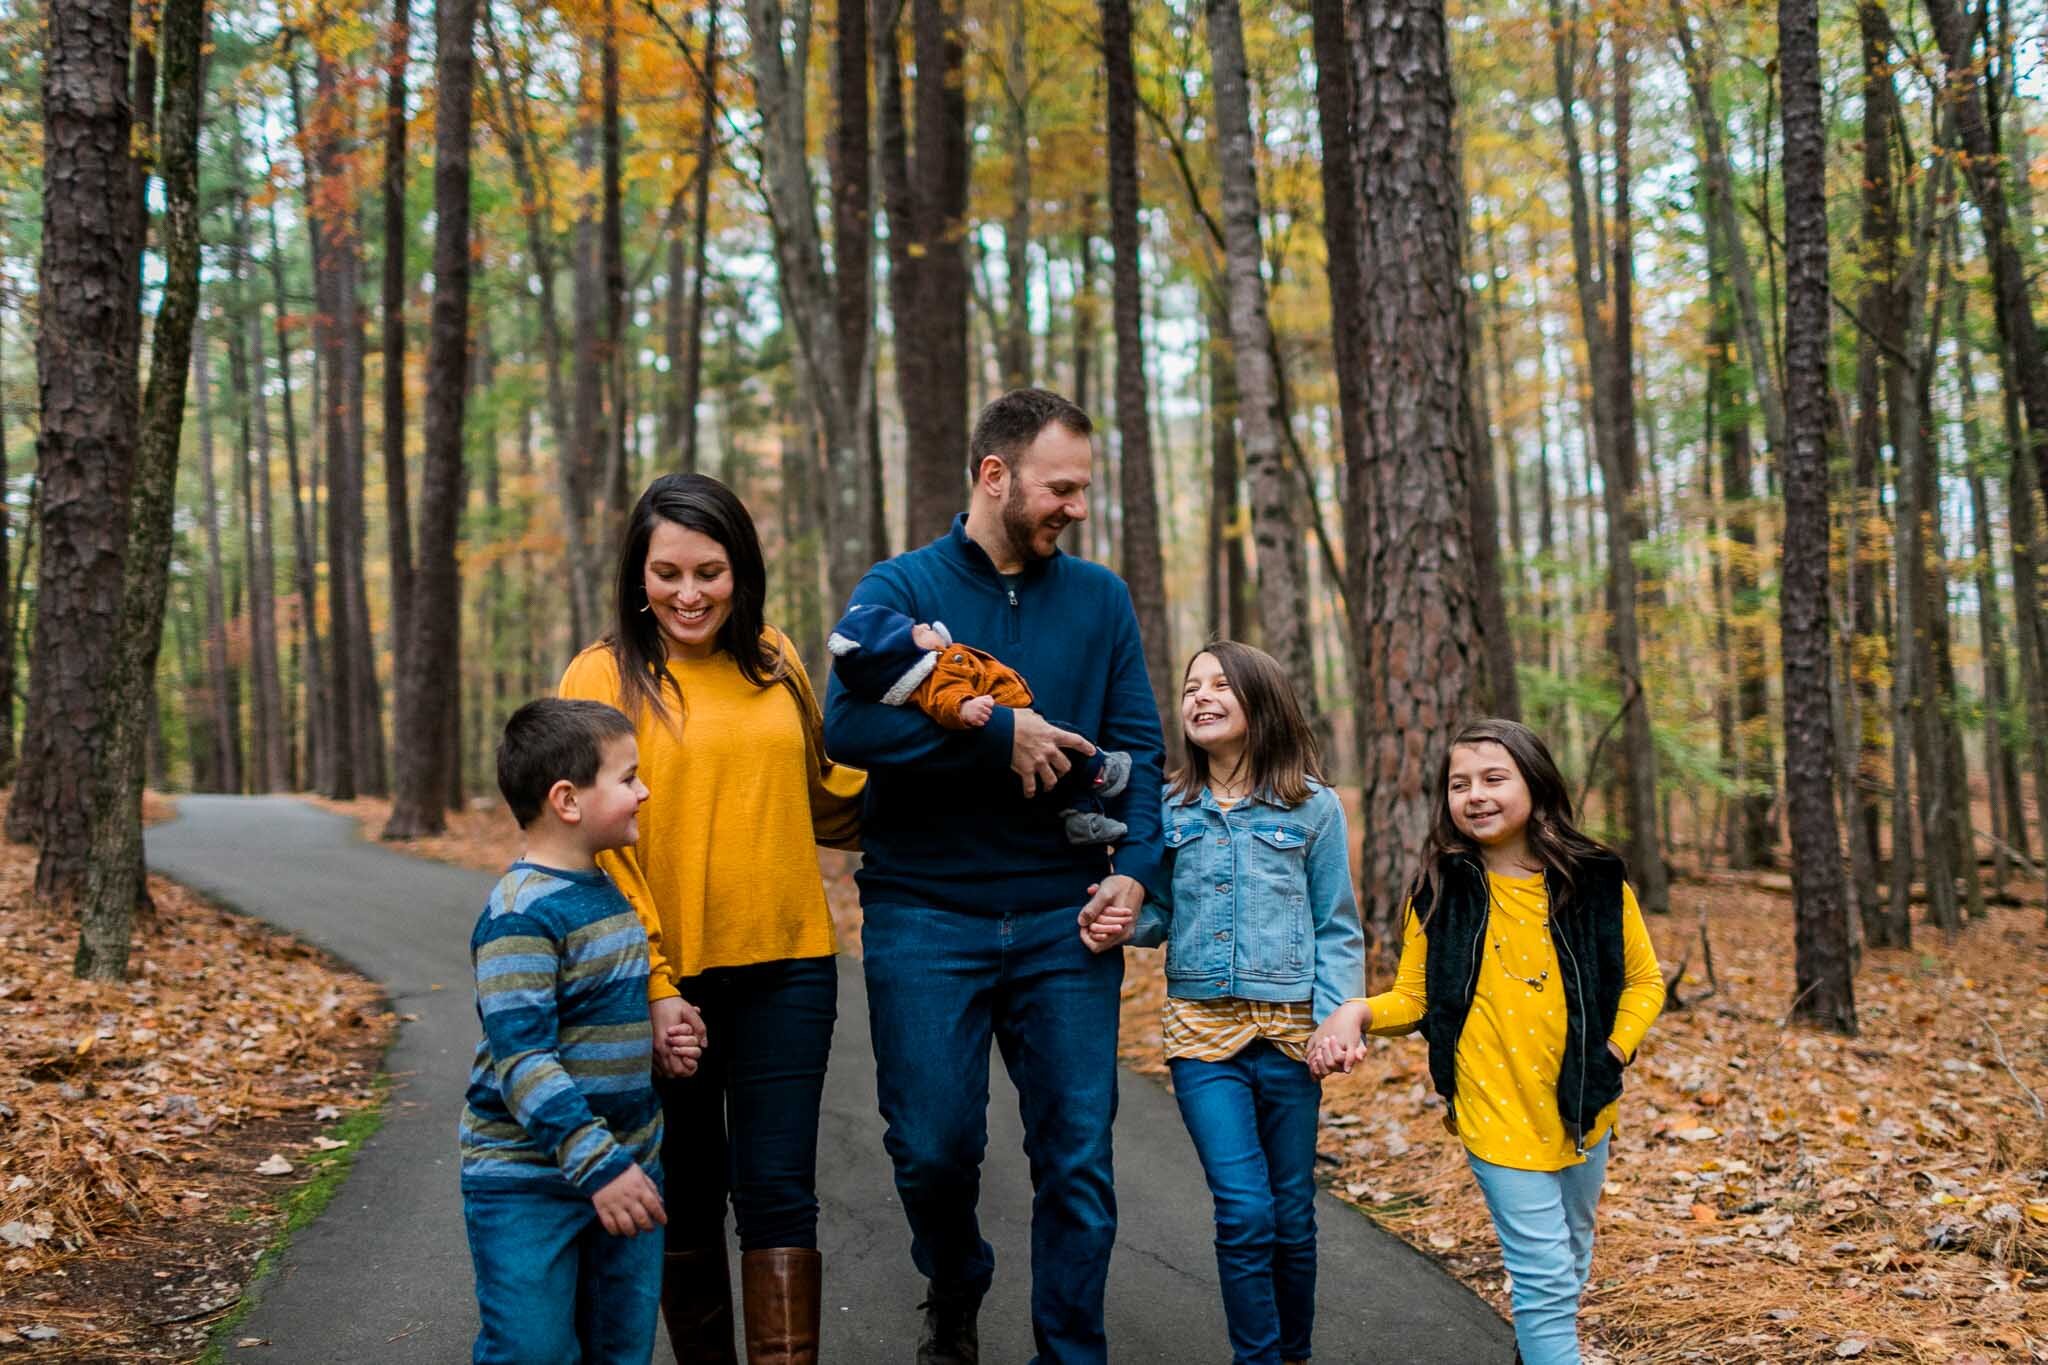 Raleigh Family Photographer | By G. Lin Photography | Family walking on trail at Umstead Park